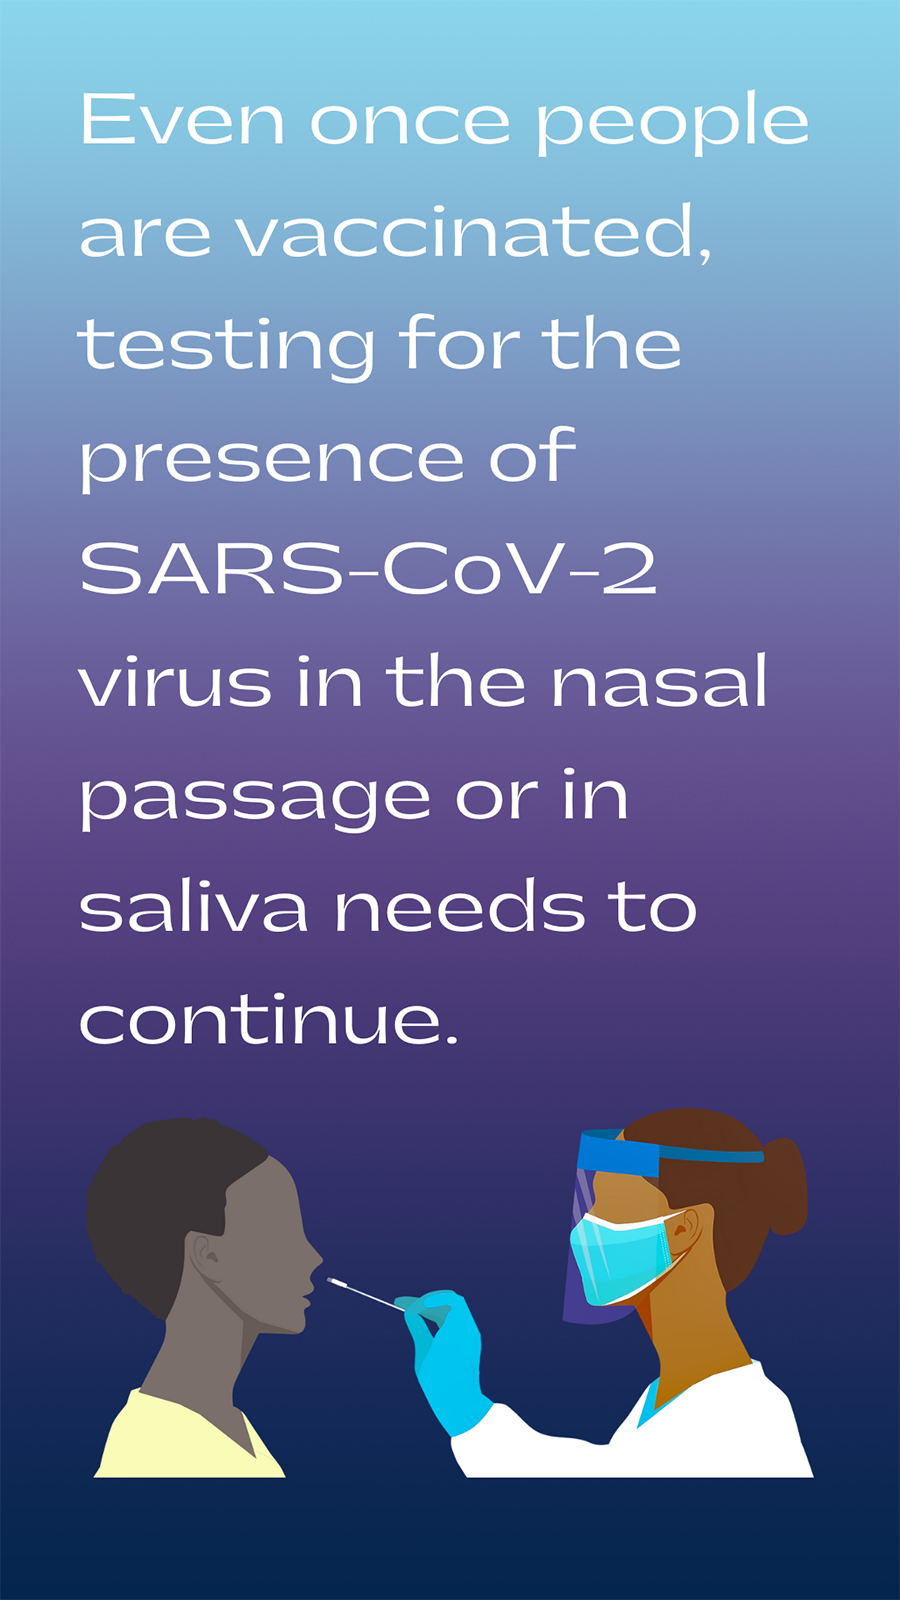 Even once people are vaccinated, testing for the presence of SARS-CoV-2 virus in the nasal passage or in saliva needs to continue.